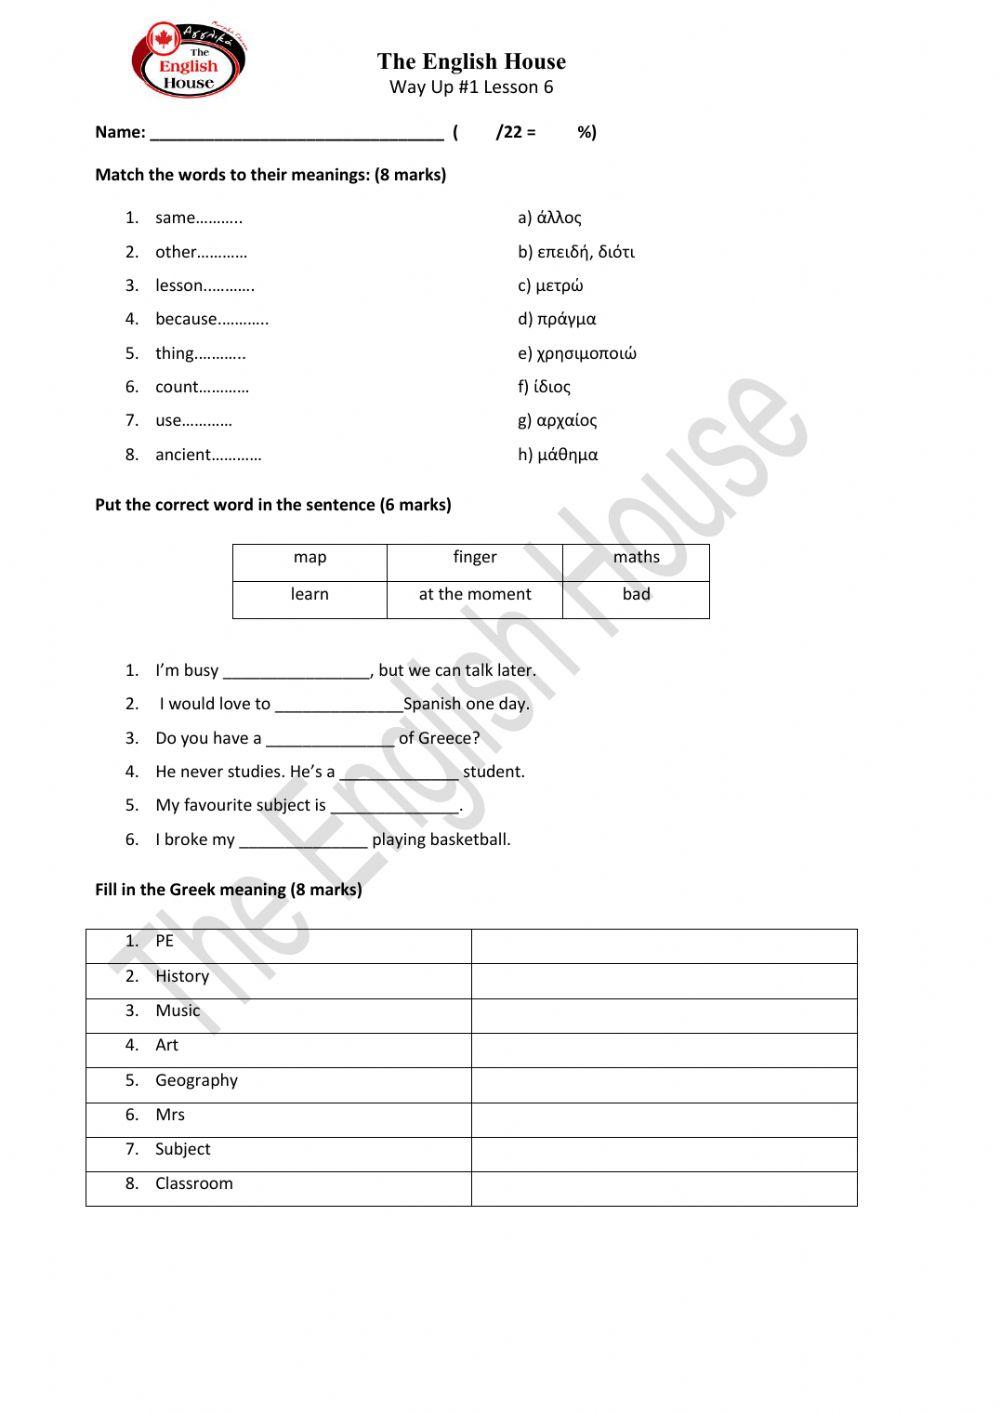 Vocabulary Way up 1 Lesson 6